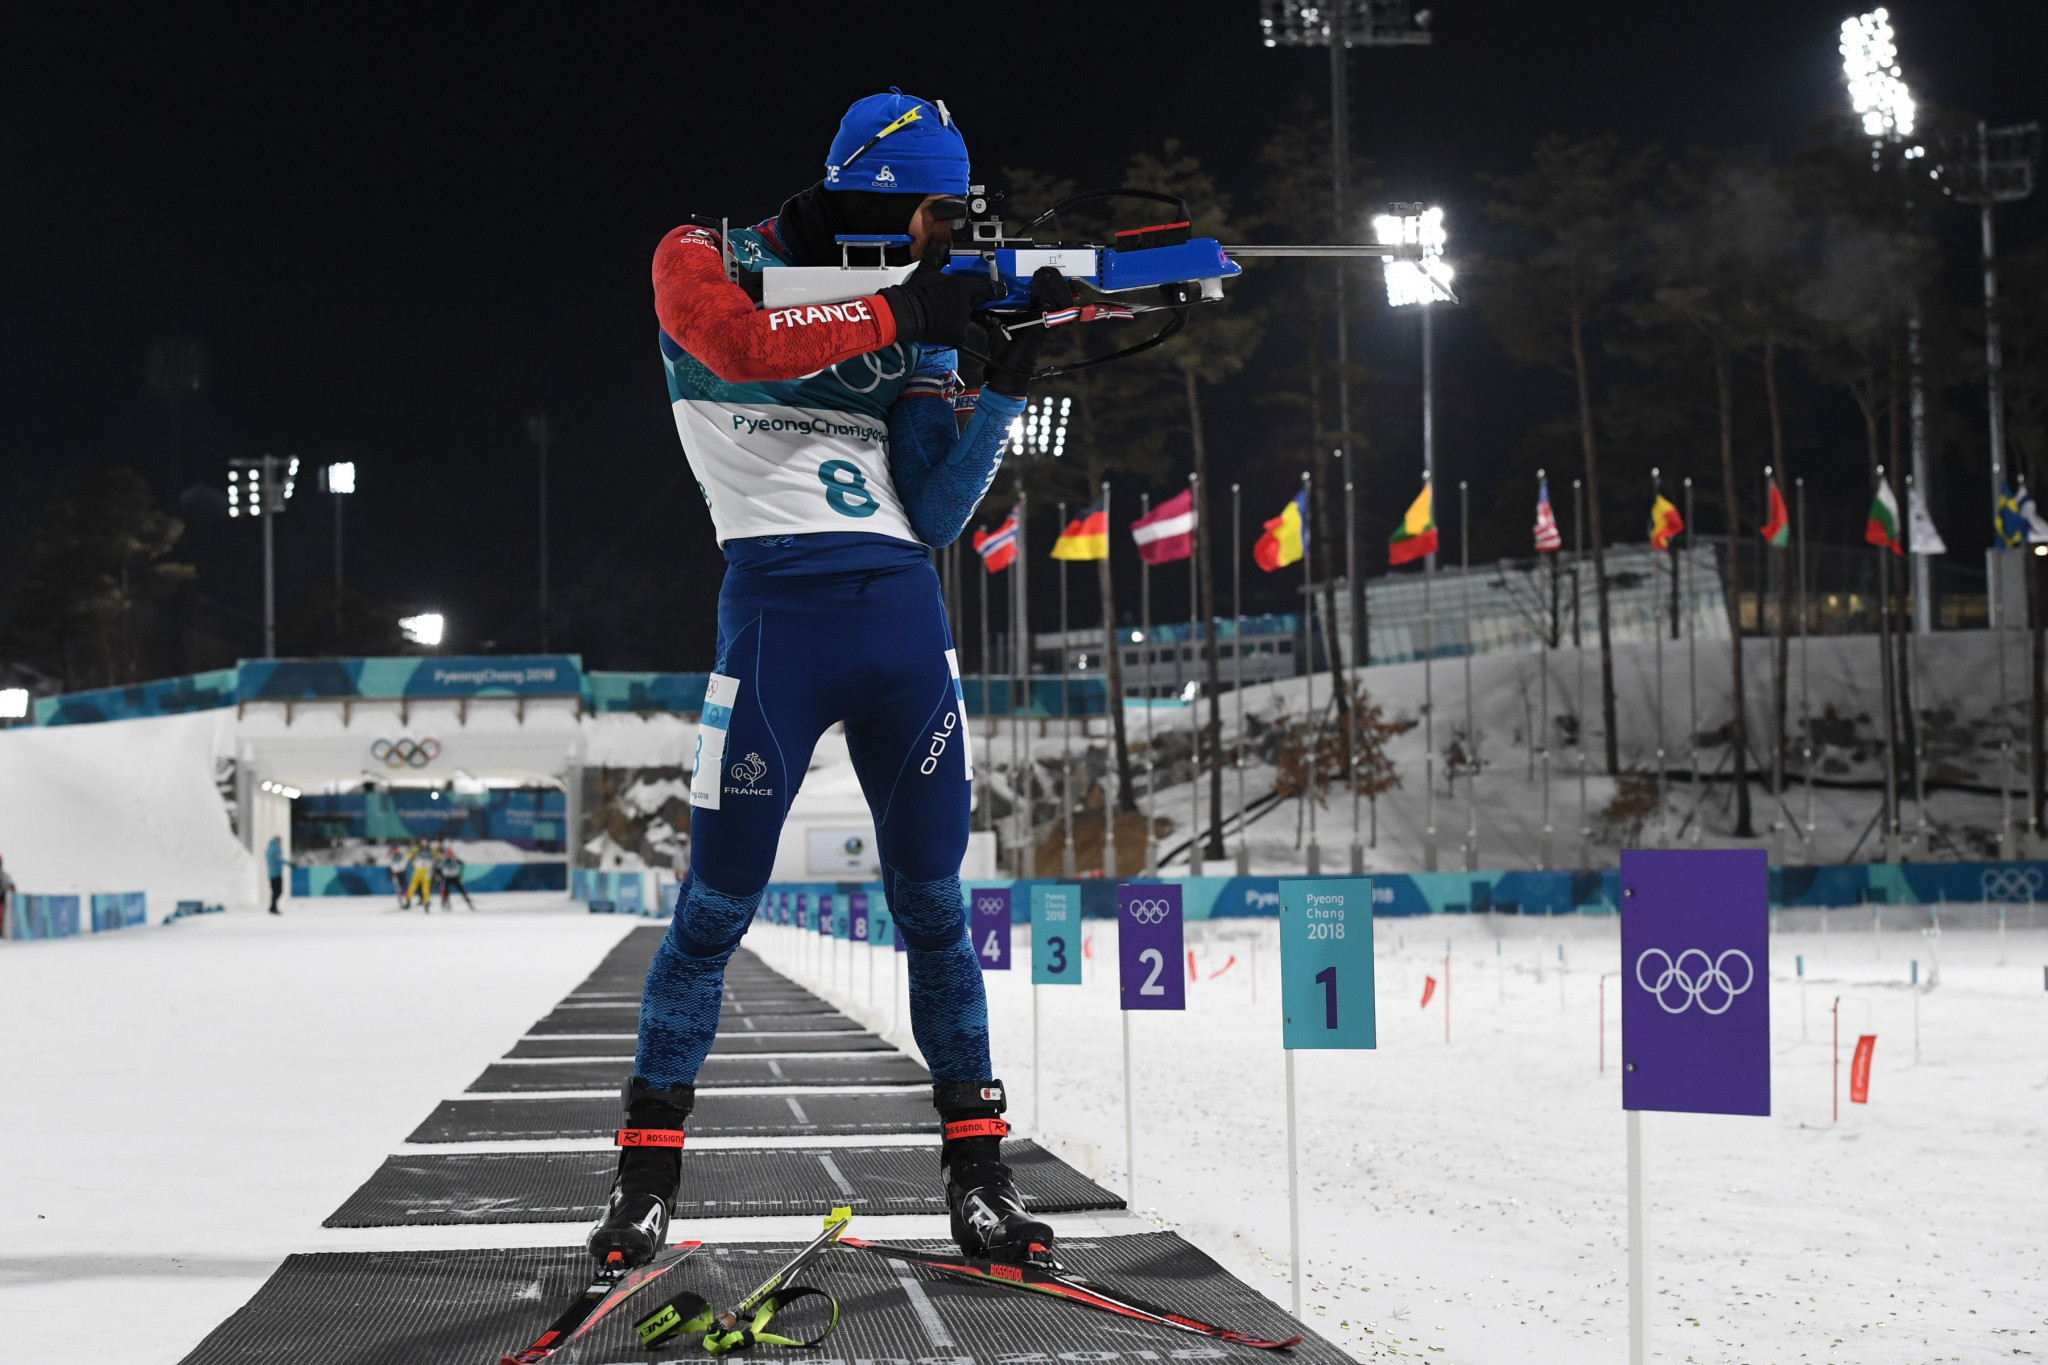 History-makers Fourcade and Dahlmeier crowned Olympic pursuit champions at Pyeongchang 2018